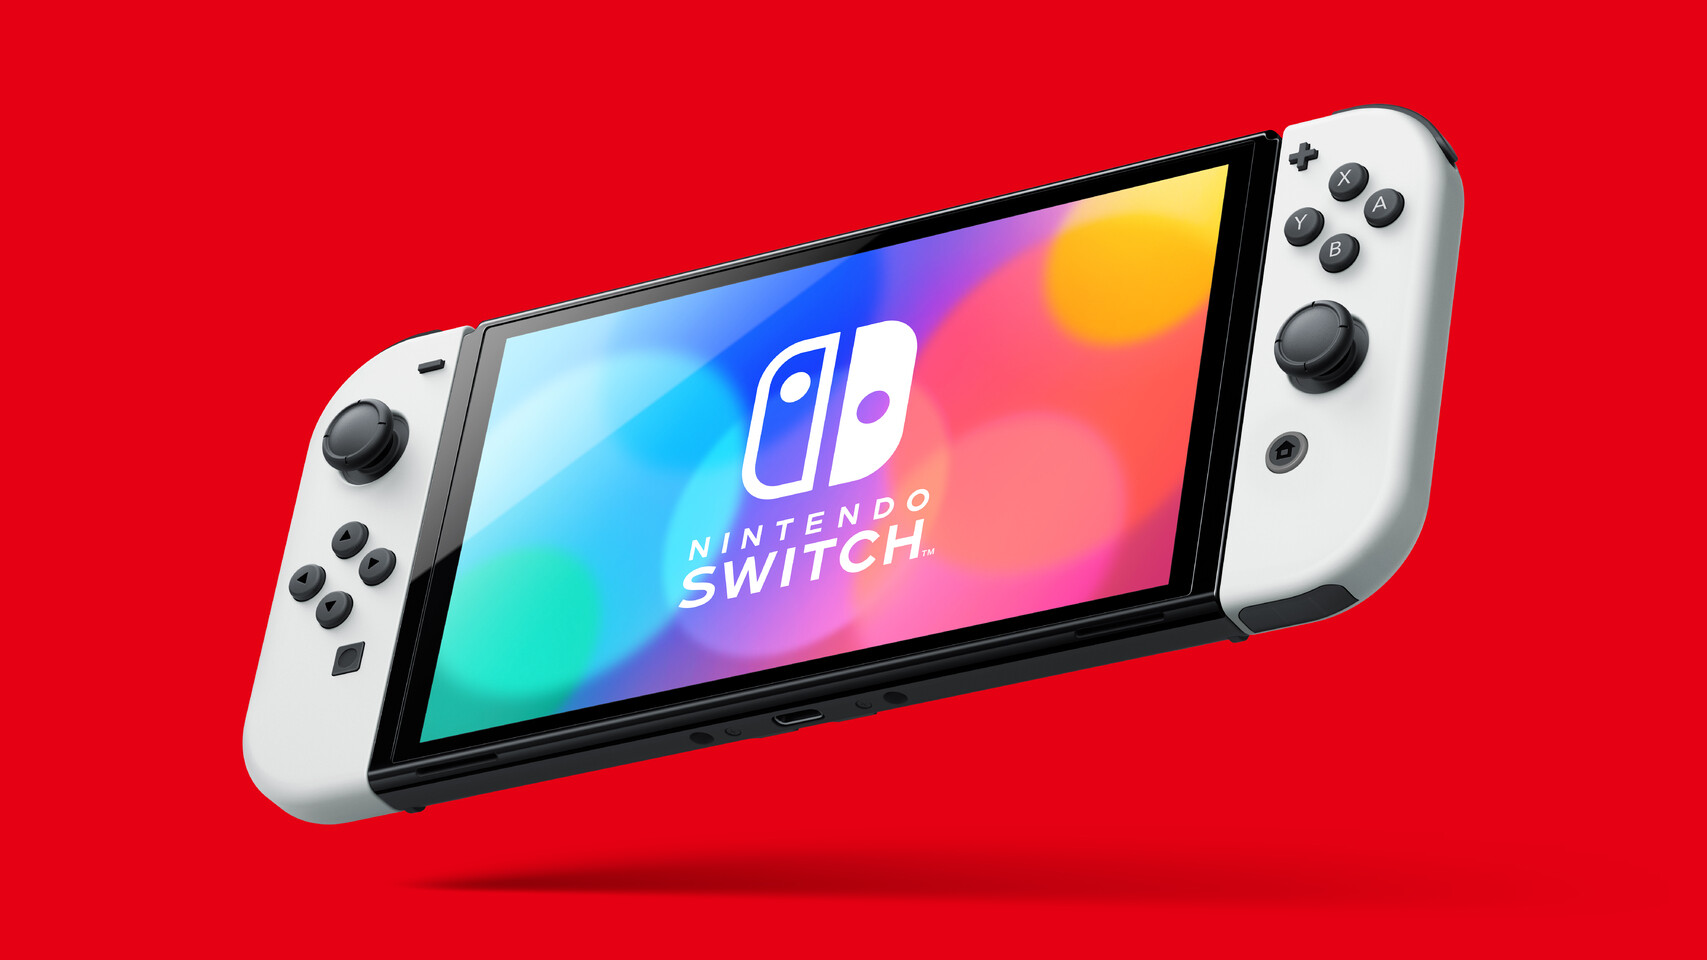 Nintendo Announces Nintendo Switch Oled Model With A Vibrant 7 Inch Oled Screen Launching October 8th Techpowerup